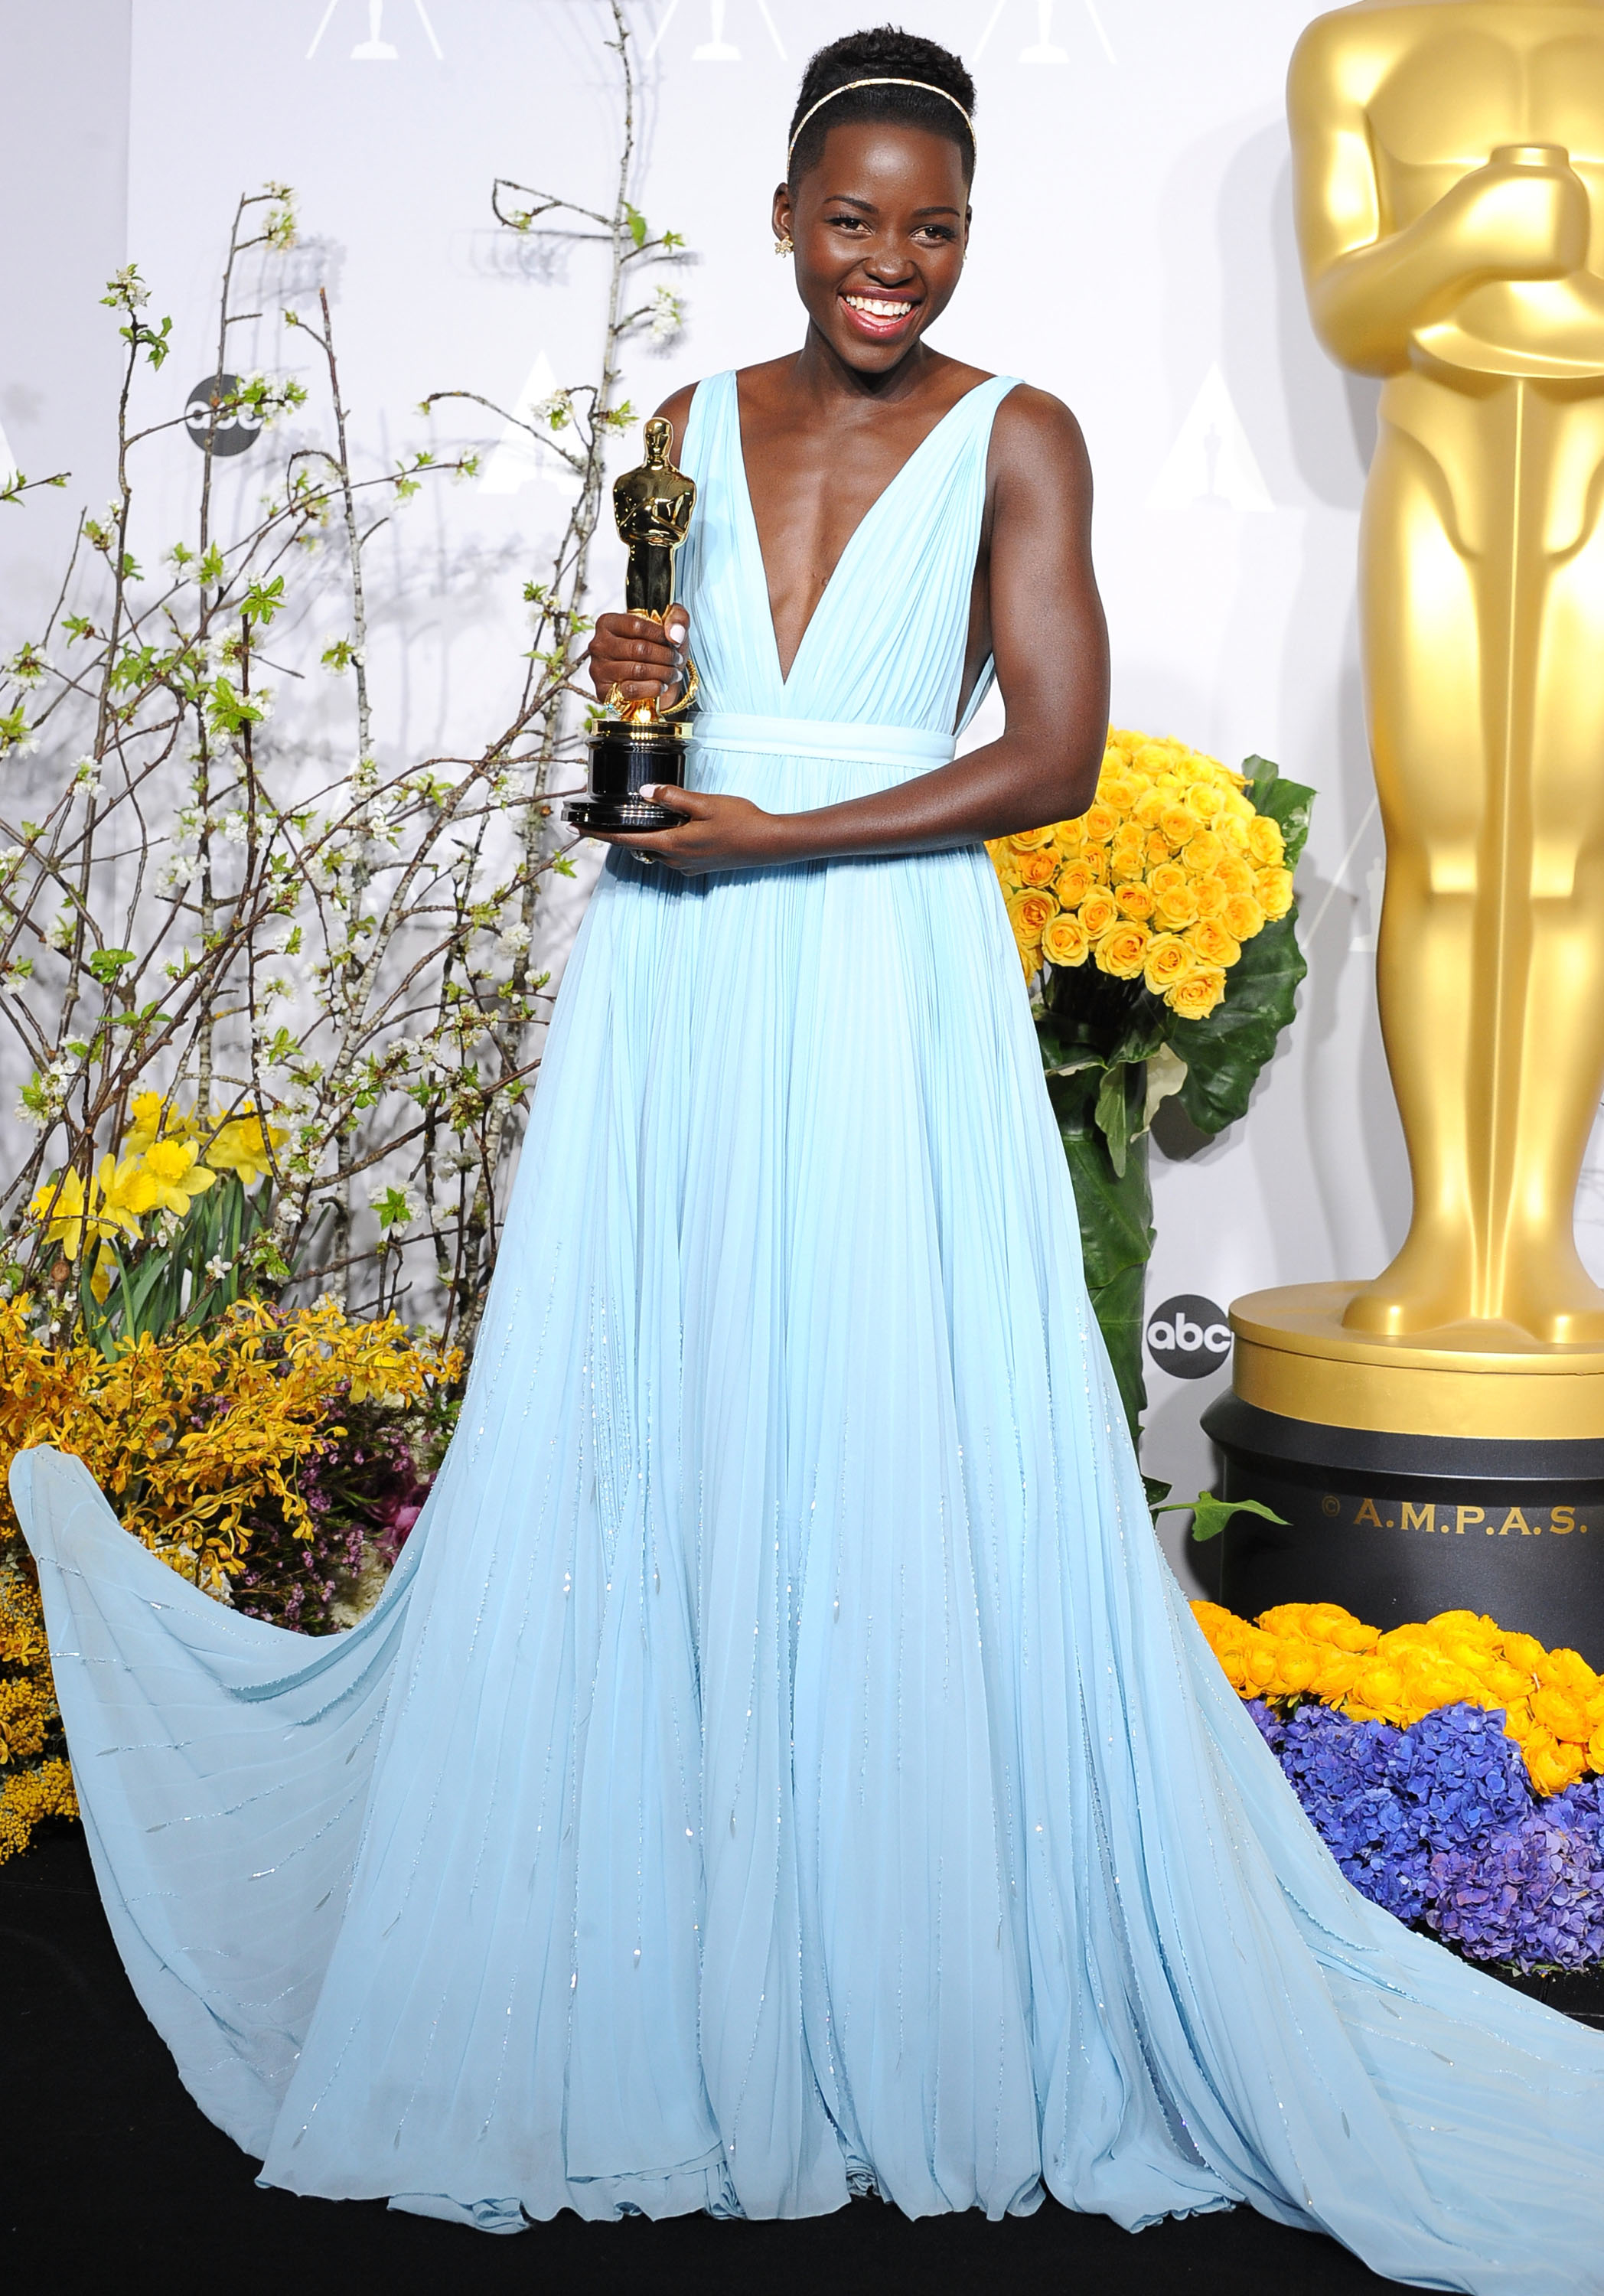 Lupita Nyong&#x27;o holding an Oscar, wearing a plunging V-neck light blue gown with a flowing skirt, standing beside a golden statue